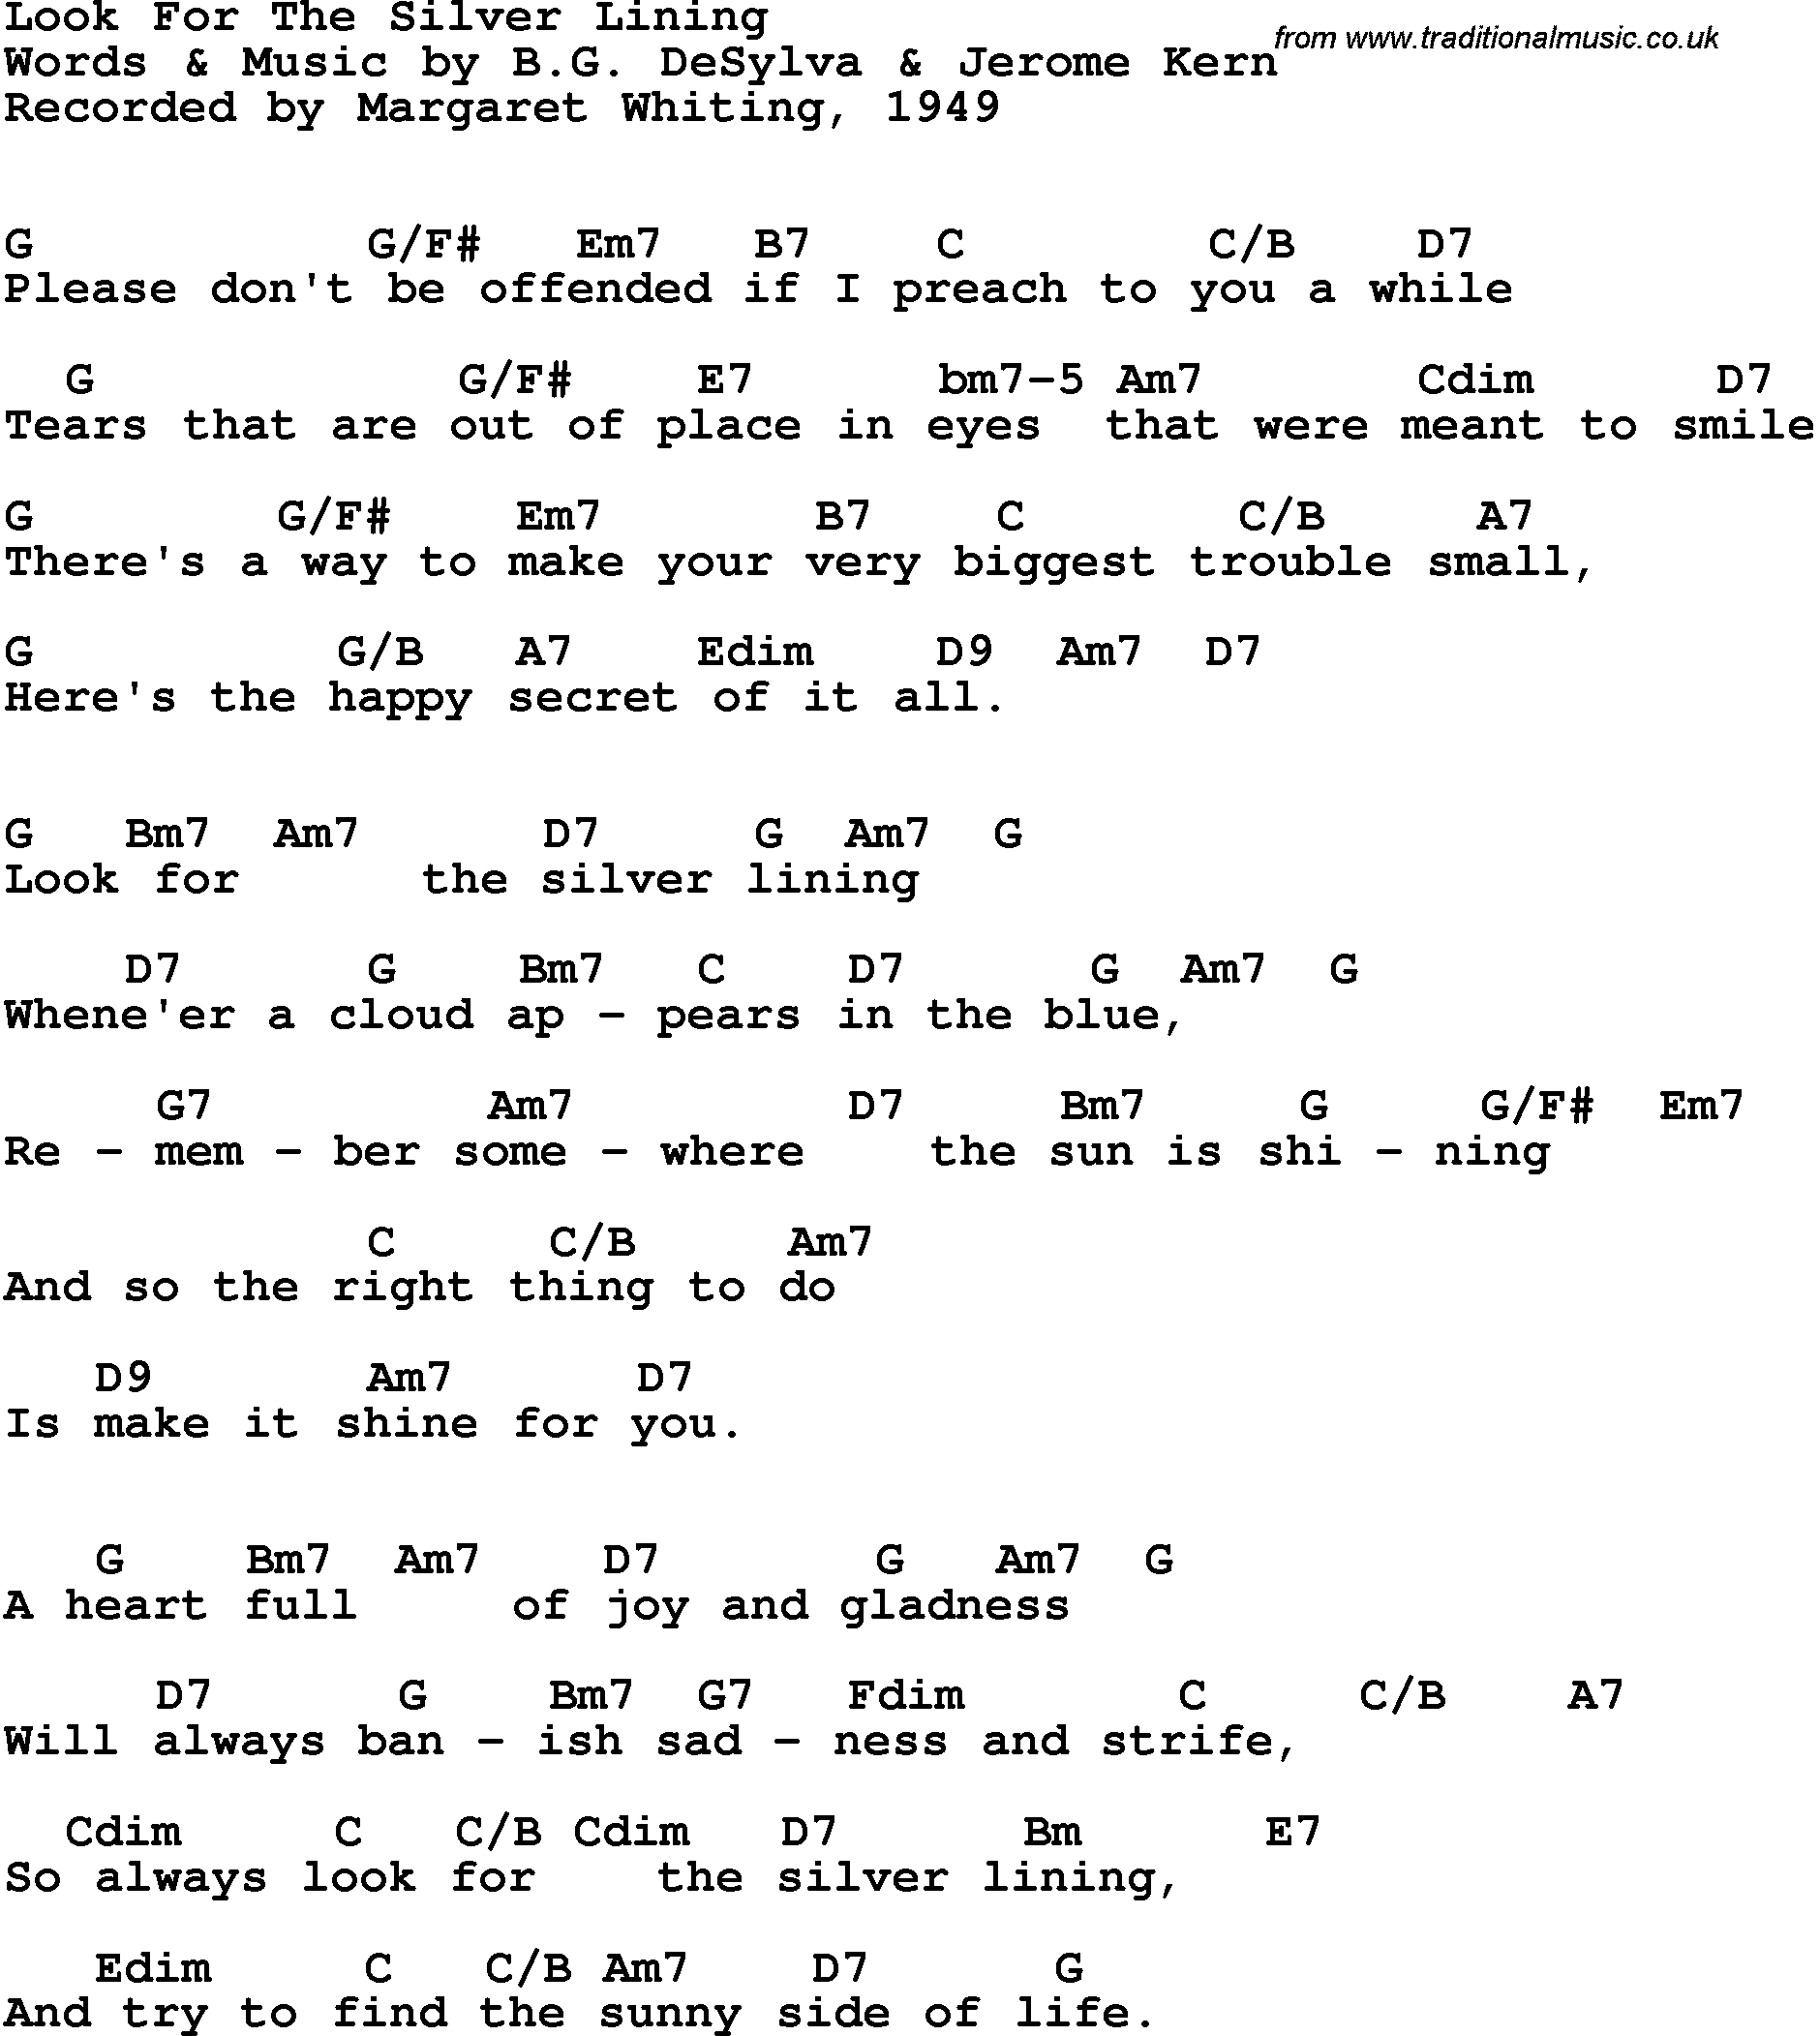 Song Lyrics with guitar chords for Look For The Silver Lining - Margaret Whiting, 1949